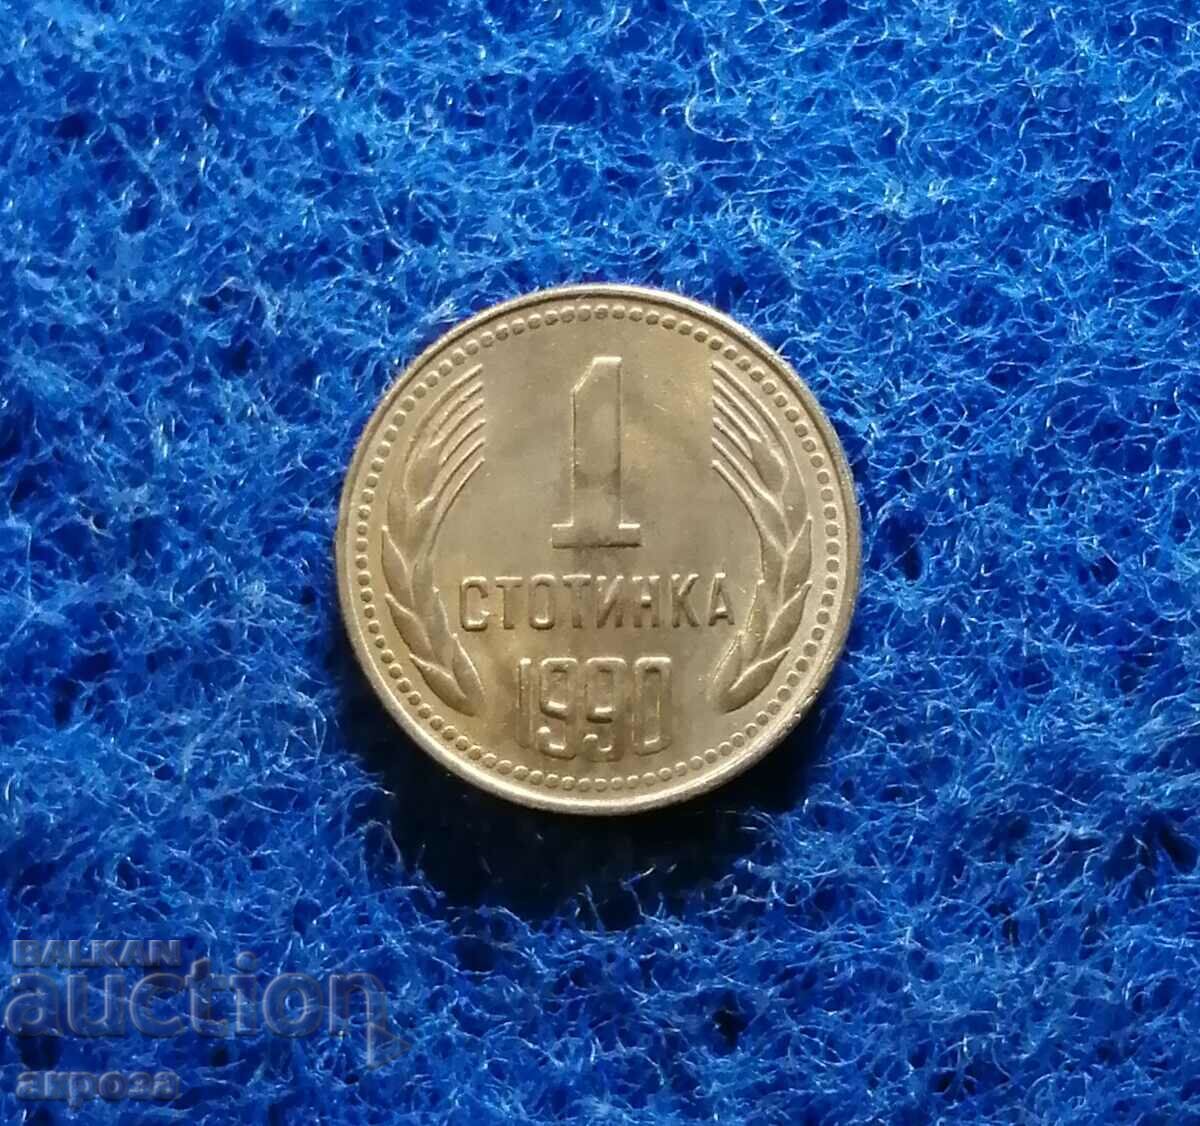 1 cent 1990 UNCIRCULATED